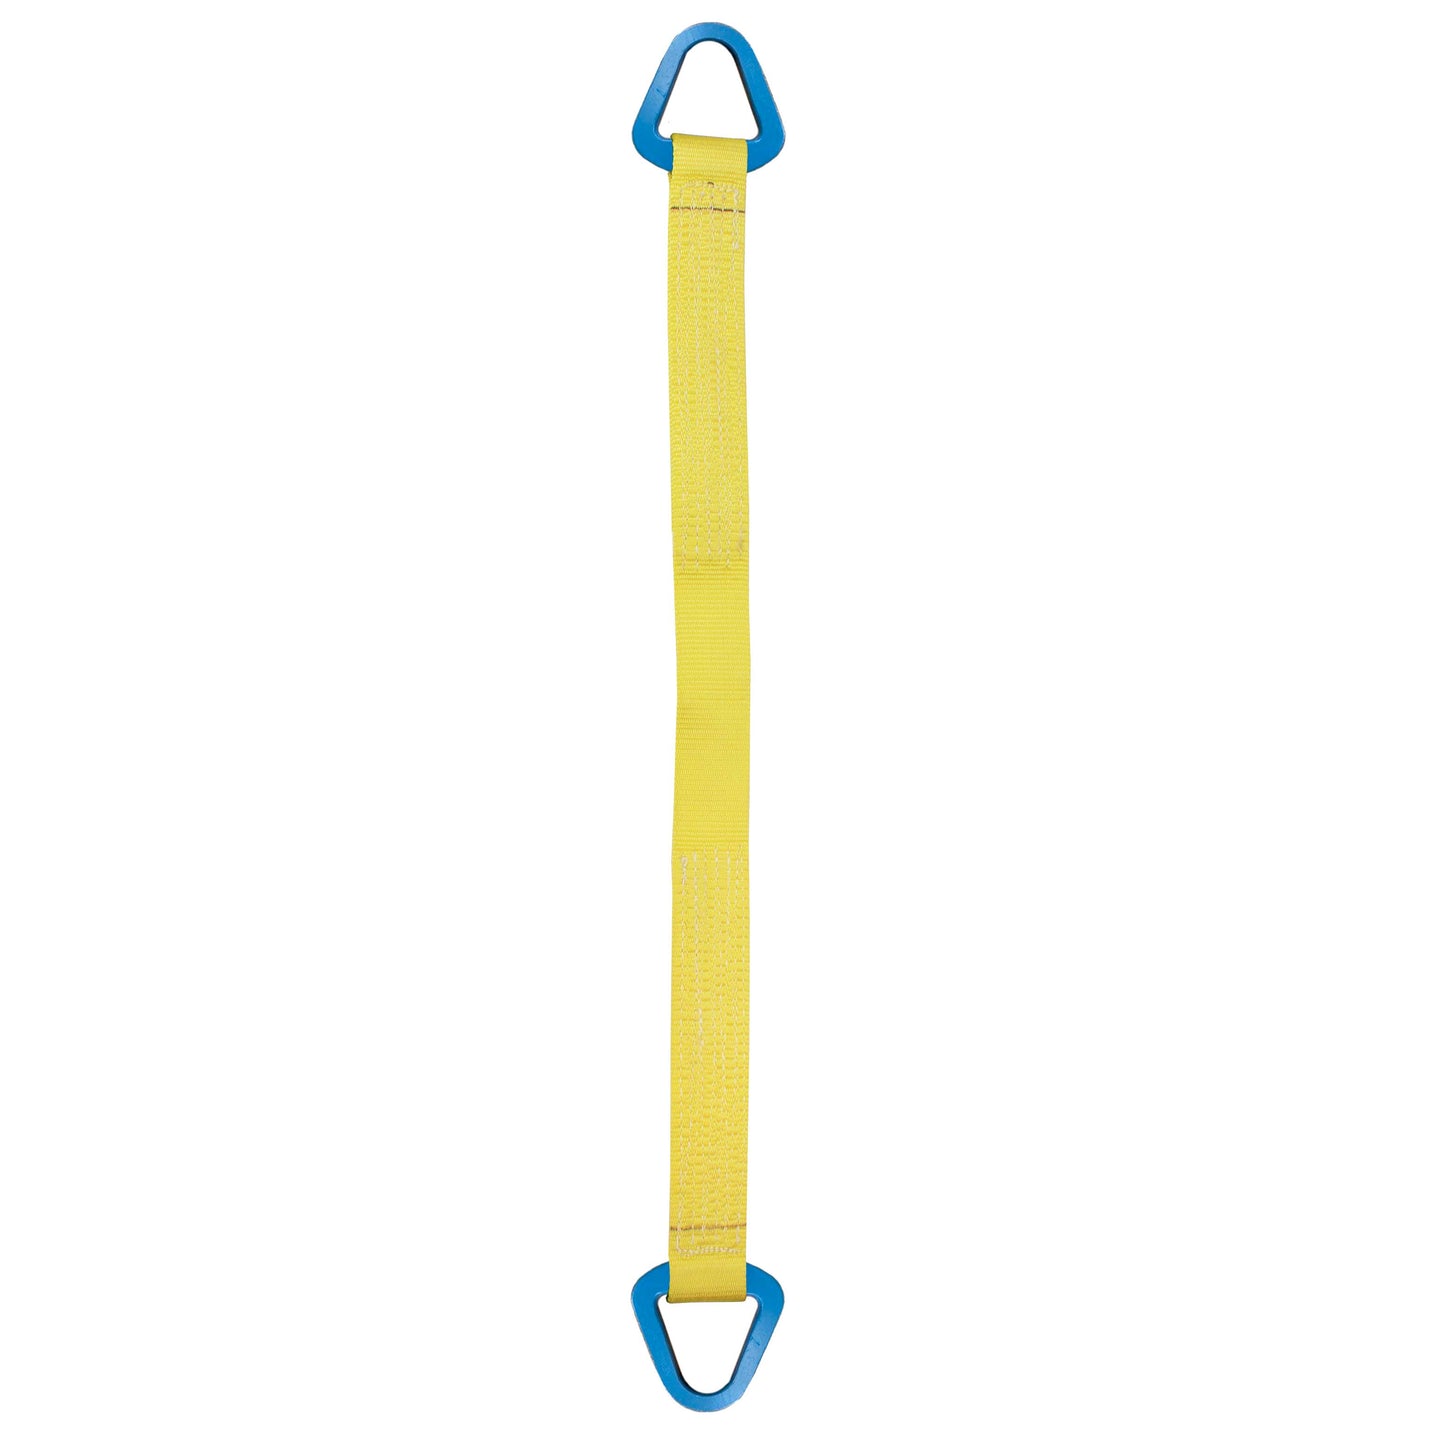 Nylon Lifting Sling Triangle 3 inch x 6 foot 2ply image 1 of 2